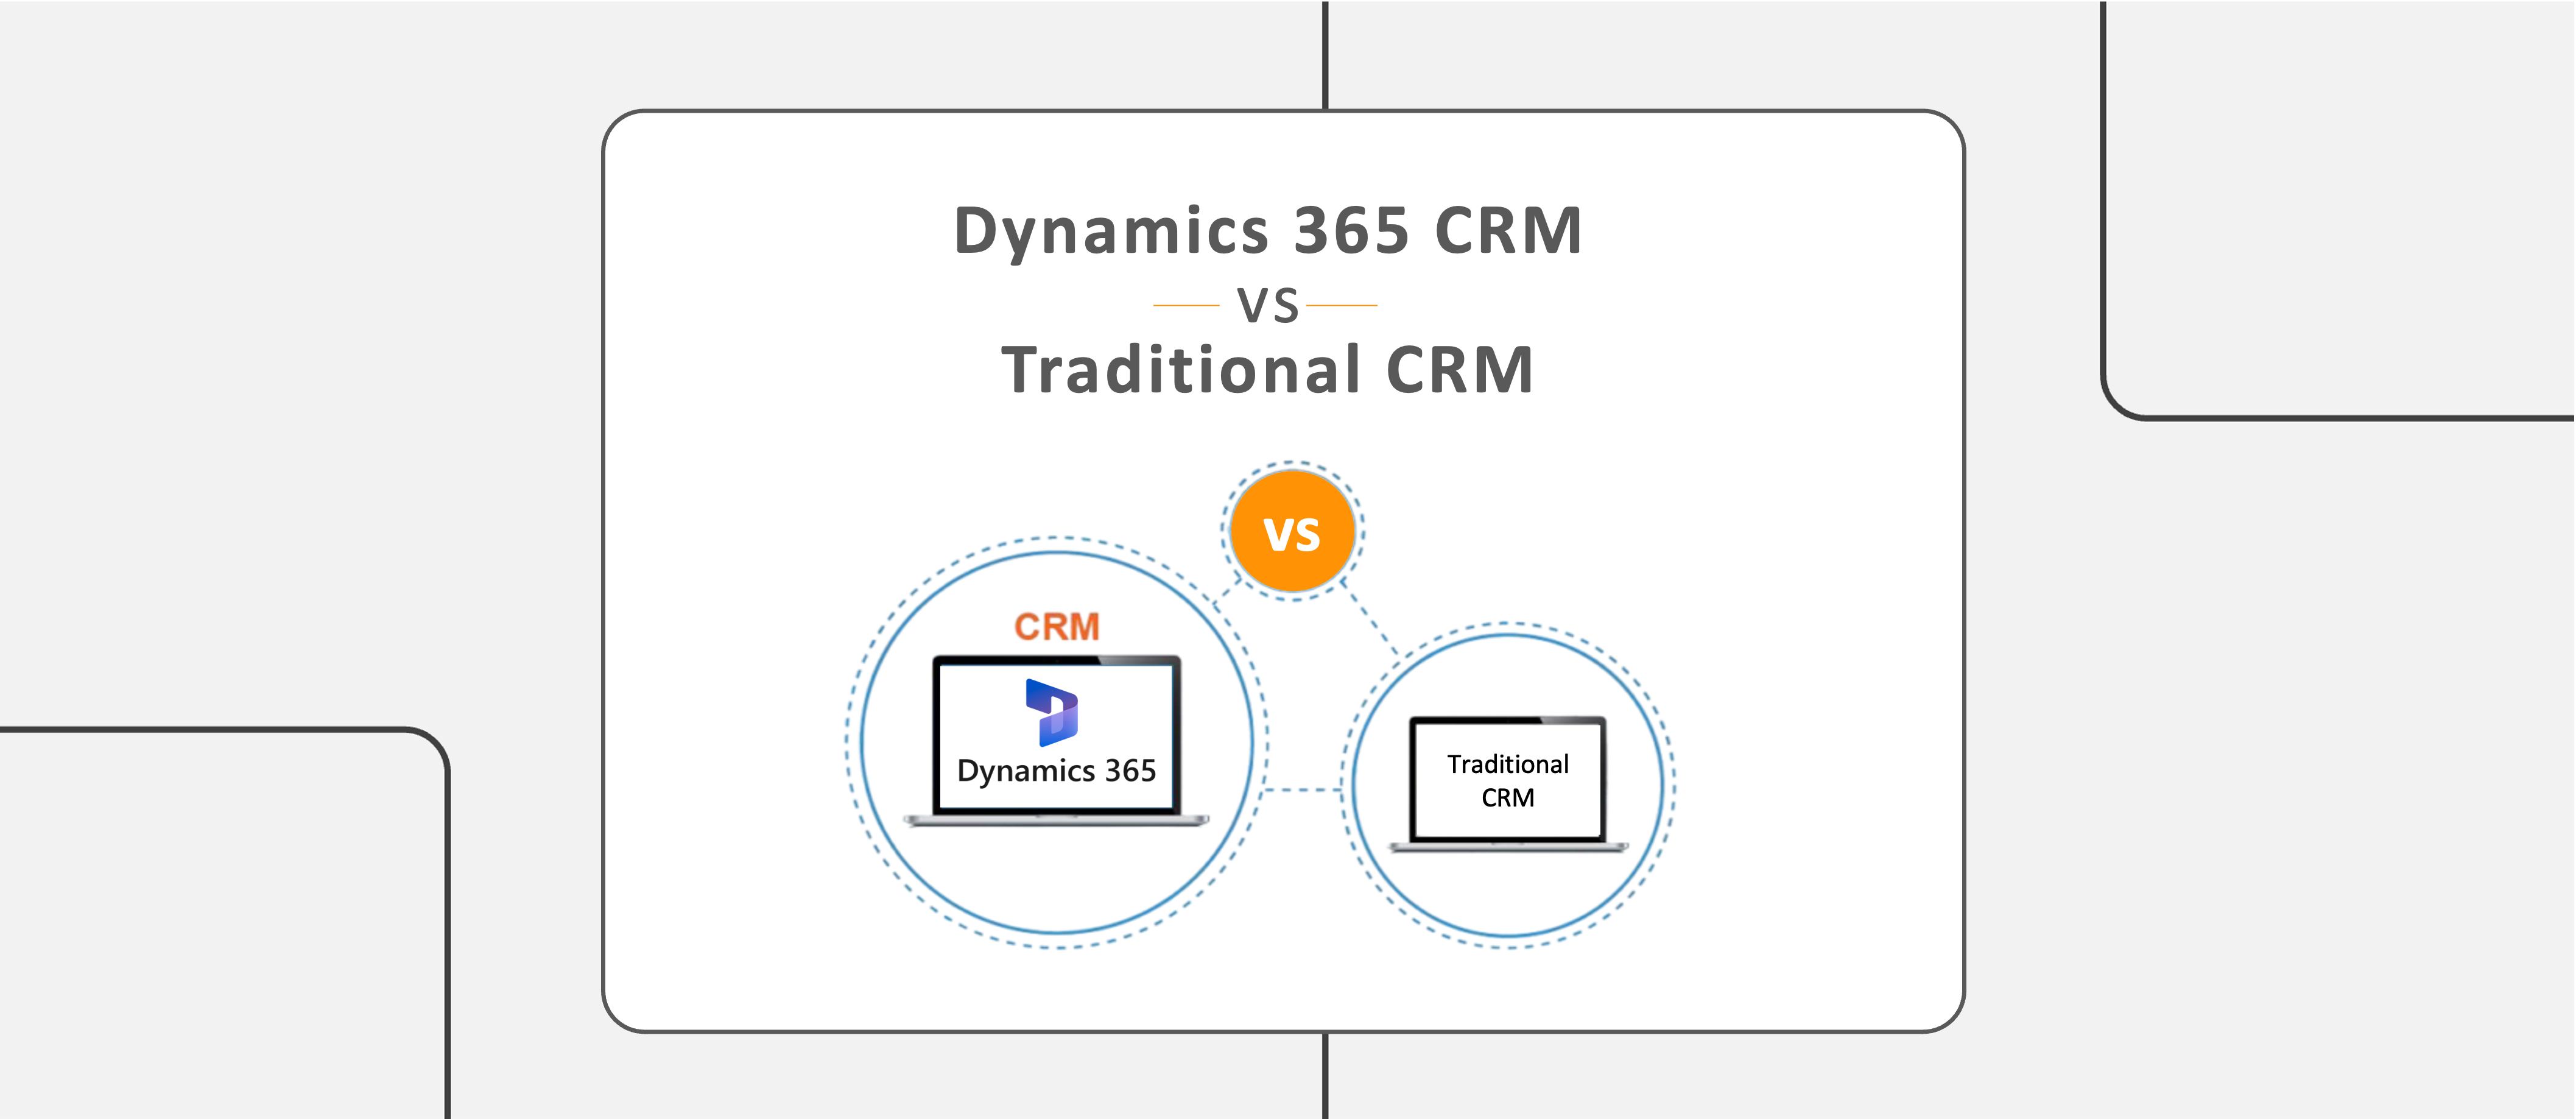 Dynamics 365 CRM vs traditional CRM: Which is right for you?